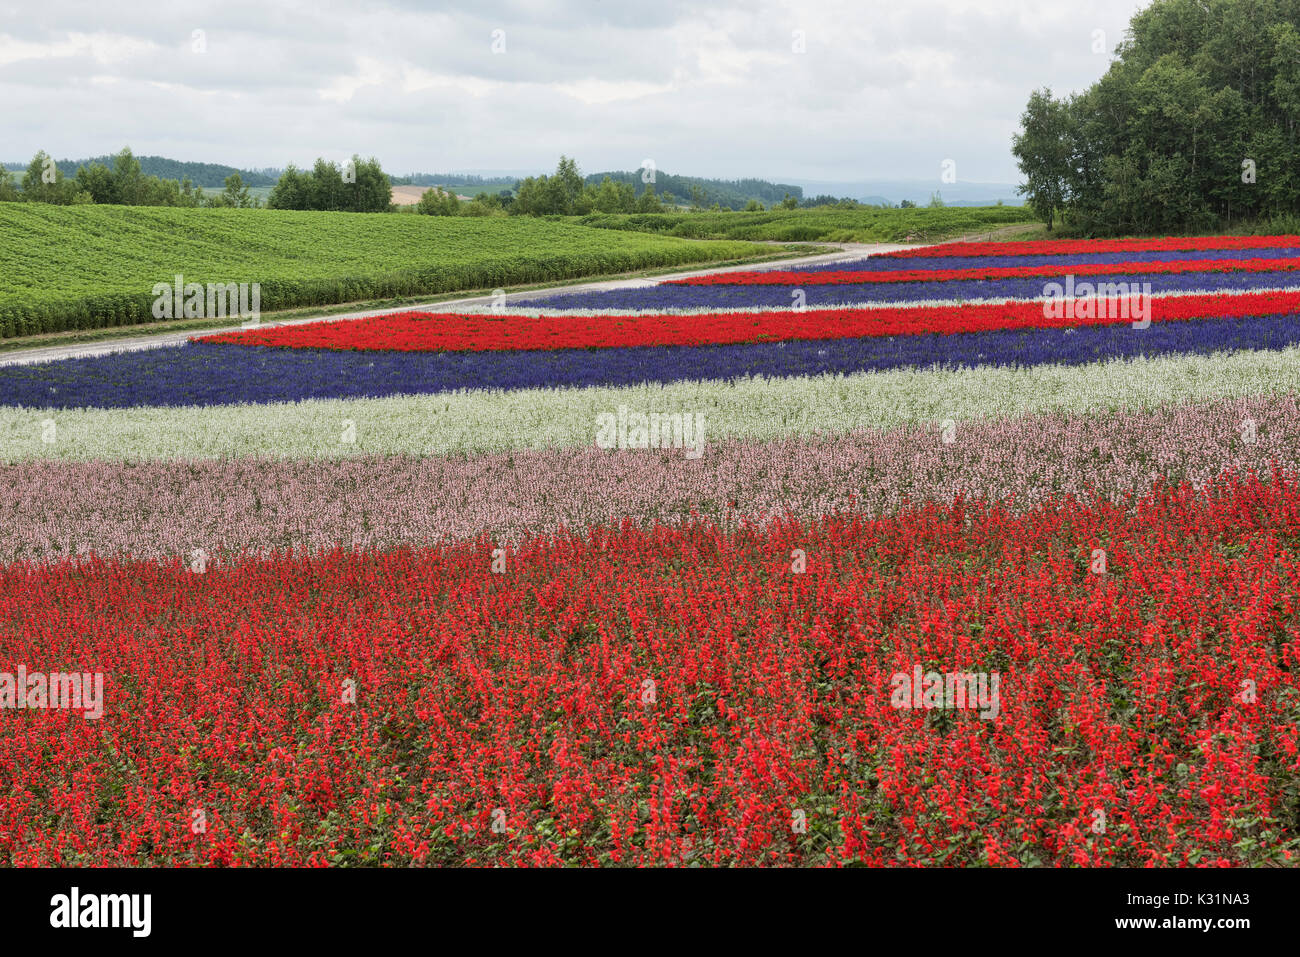 Rainbow fields of snapdragons, Lamiaceae, and scarlet sage at the flower fields of Shikisai no Oka, Hokkaido, Japan Stock Photo